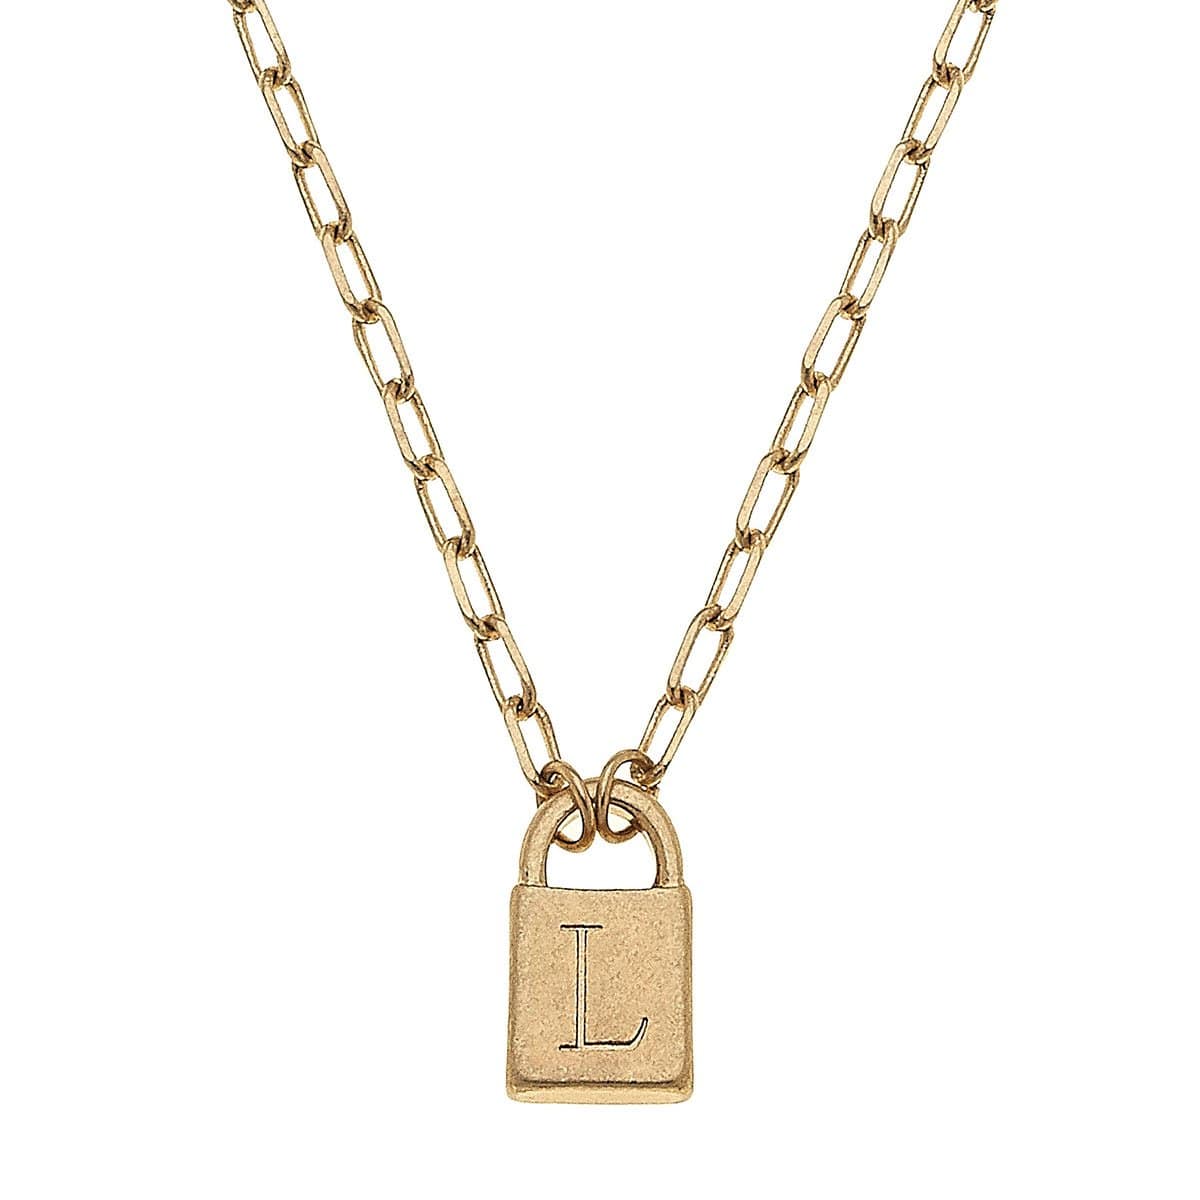 Buy Locket Necklace Gold, Old English Initial Necklace, Engraved Gold  Necklace, Lock Necklace With Initial, Gift for Bridesmaid, Custom Necklace  Online in India - Etsy